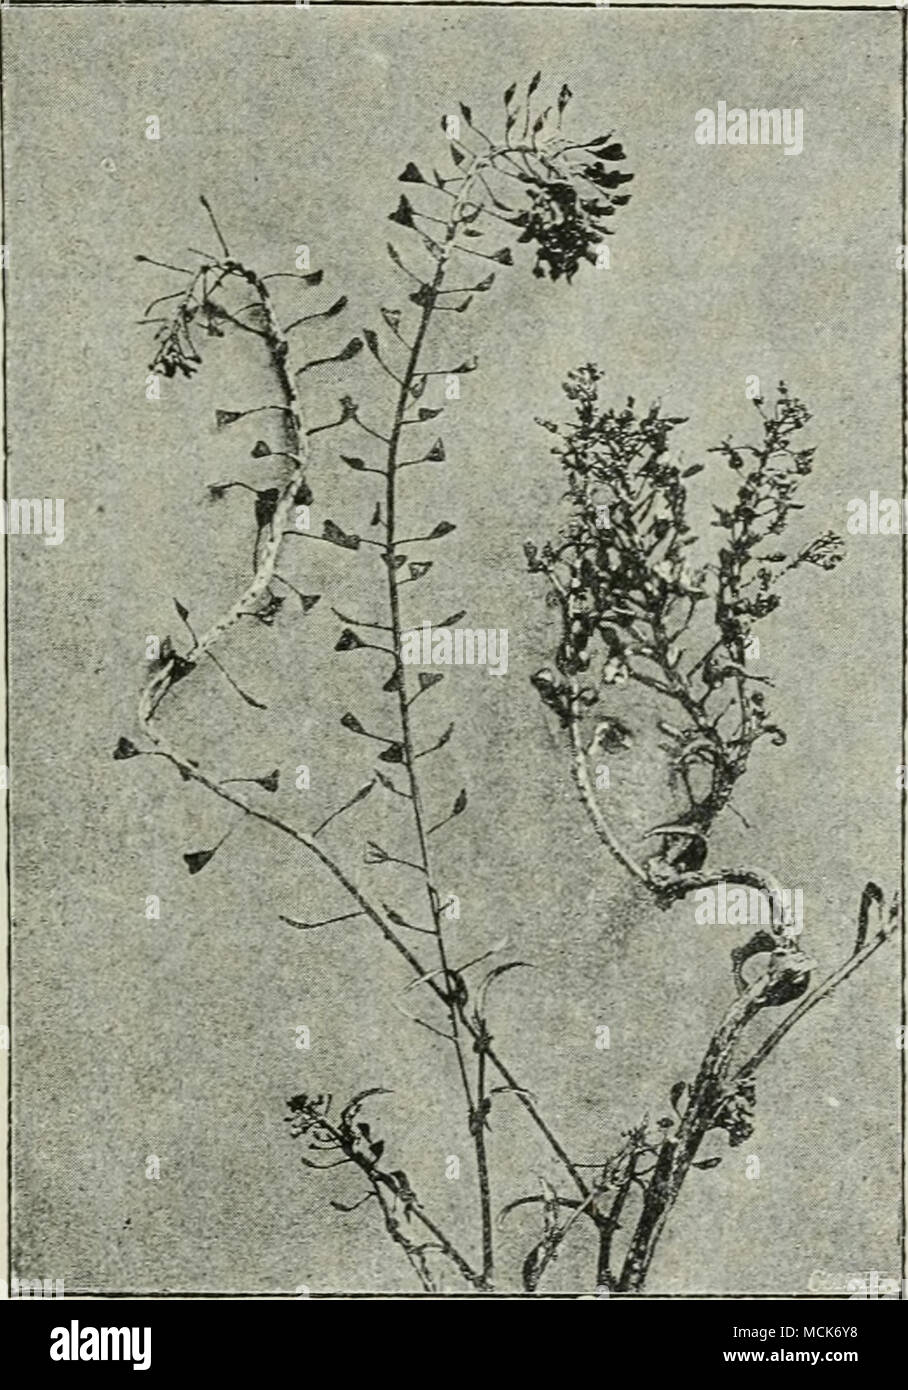 . Fig. 33.—Costopi'.s candidus on plants of Capsella hario. pastorig. The fungus has caused distortion and thickening; the white porcellanous conidial cushions shew up distinctly on the dark background, (v. Tubeuf phot.) swarming spores with two unequal lateral cilia. The egg-cells, produced singly in each oogonium, are fertilized by an antheridium. The thick-walled oospores remain enclosed in the intercellular spaces of the host-tissue, and on germinating in spring discharge swarming spores. Cystopus candidus (Pers.) Lev. White Paist. This fungus Stock Photo